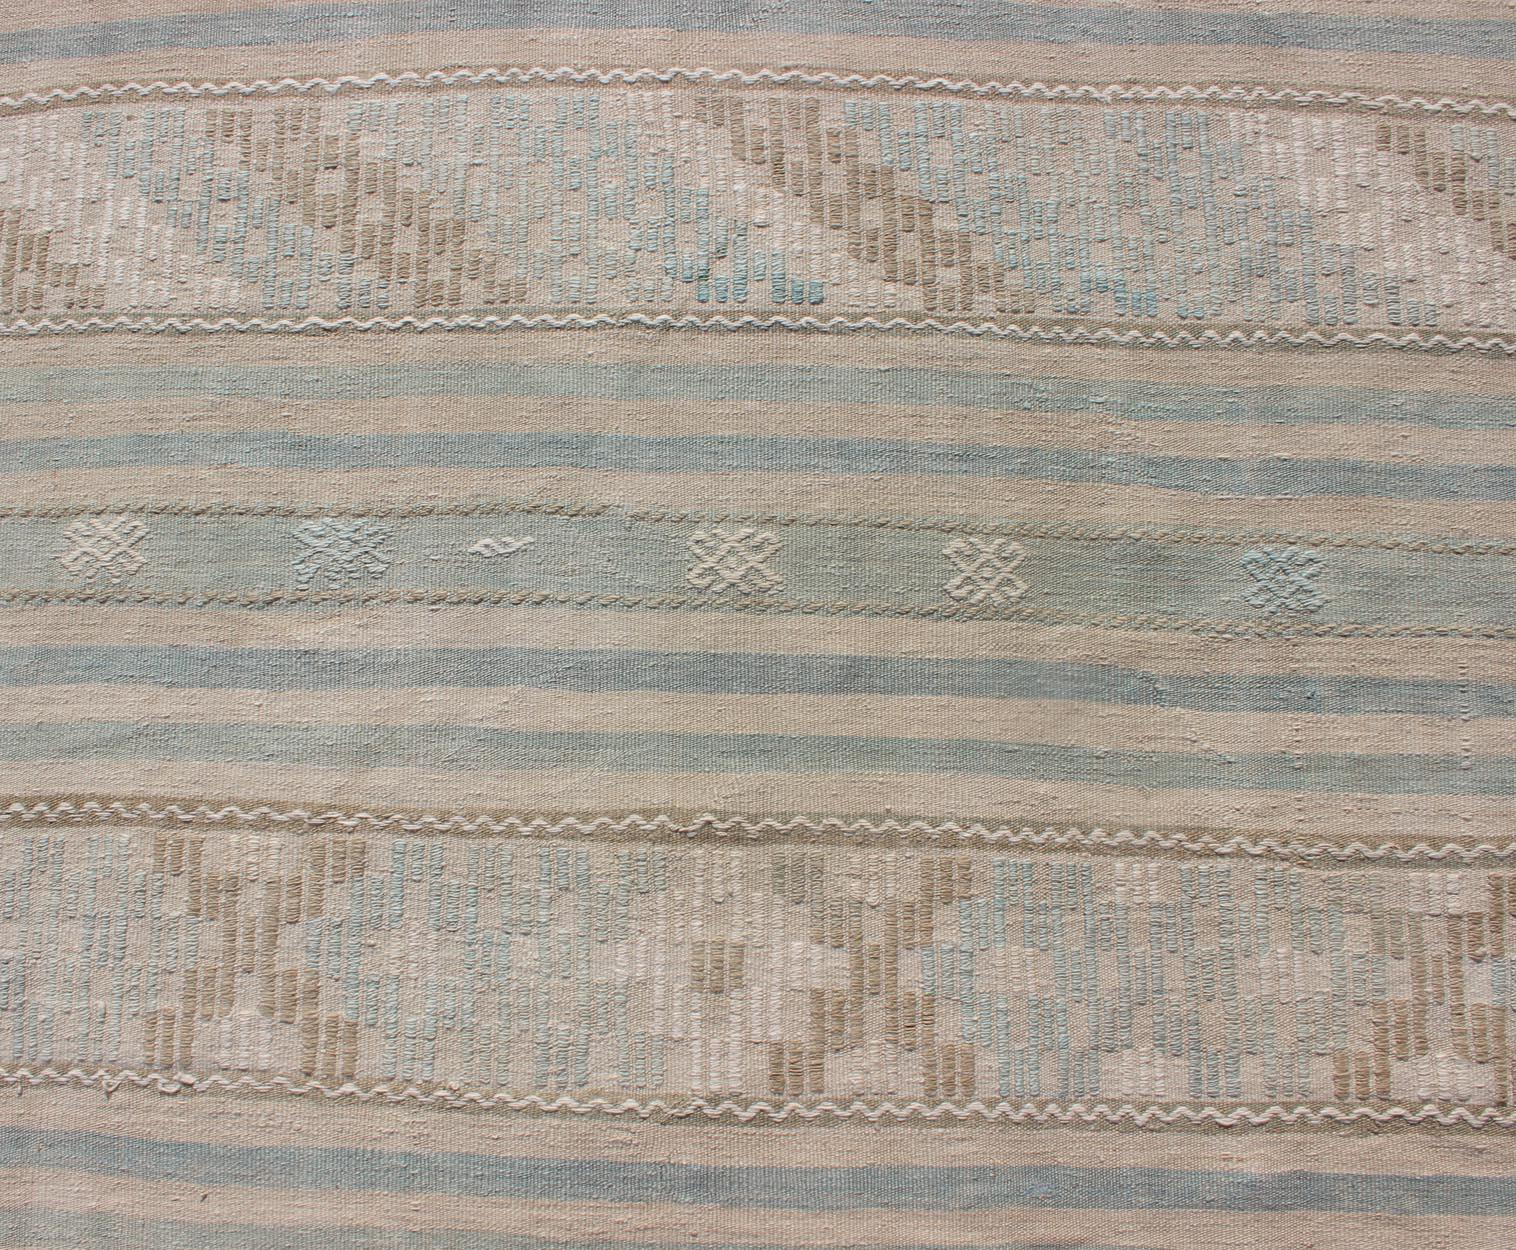 Natural-Toned Turkish Flat-Weave Kilim with Geometric Stripes Tan and Seafoam For Sale 3